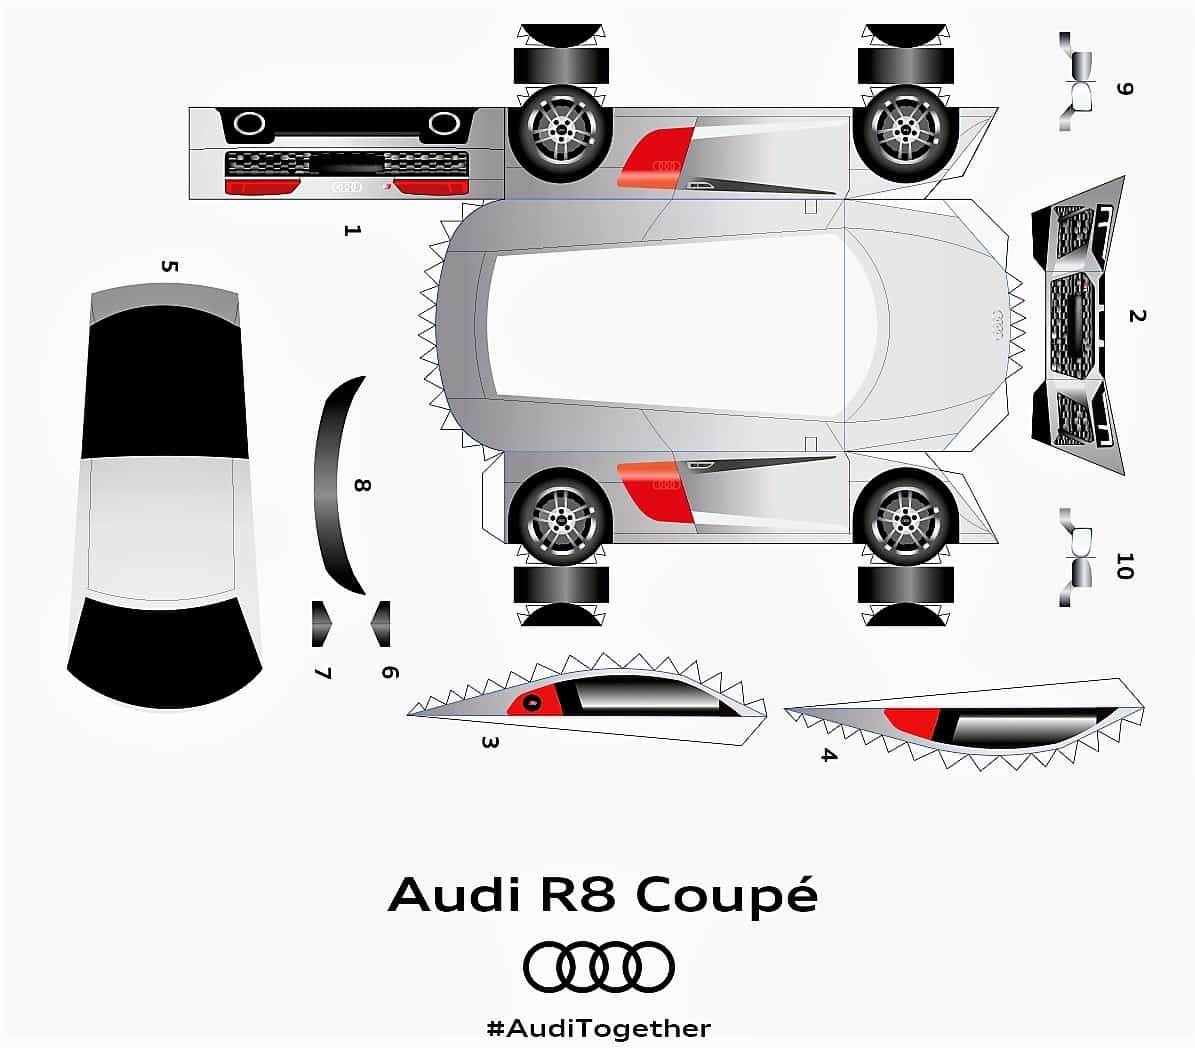 audi, Audi toasts ‘quattro de Mayo’ with 3 car cutouts to build, ClassicCars.com Journal